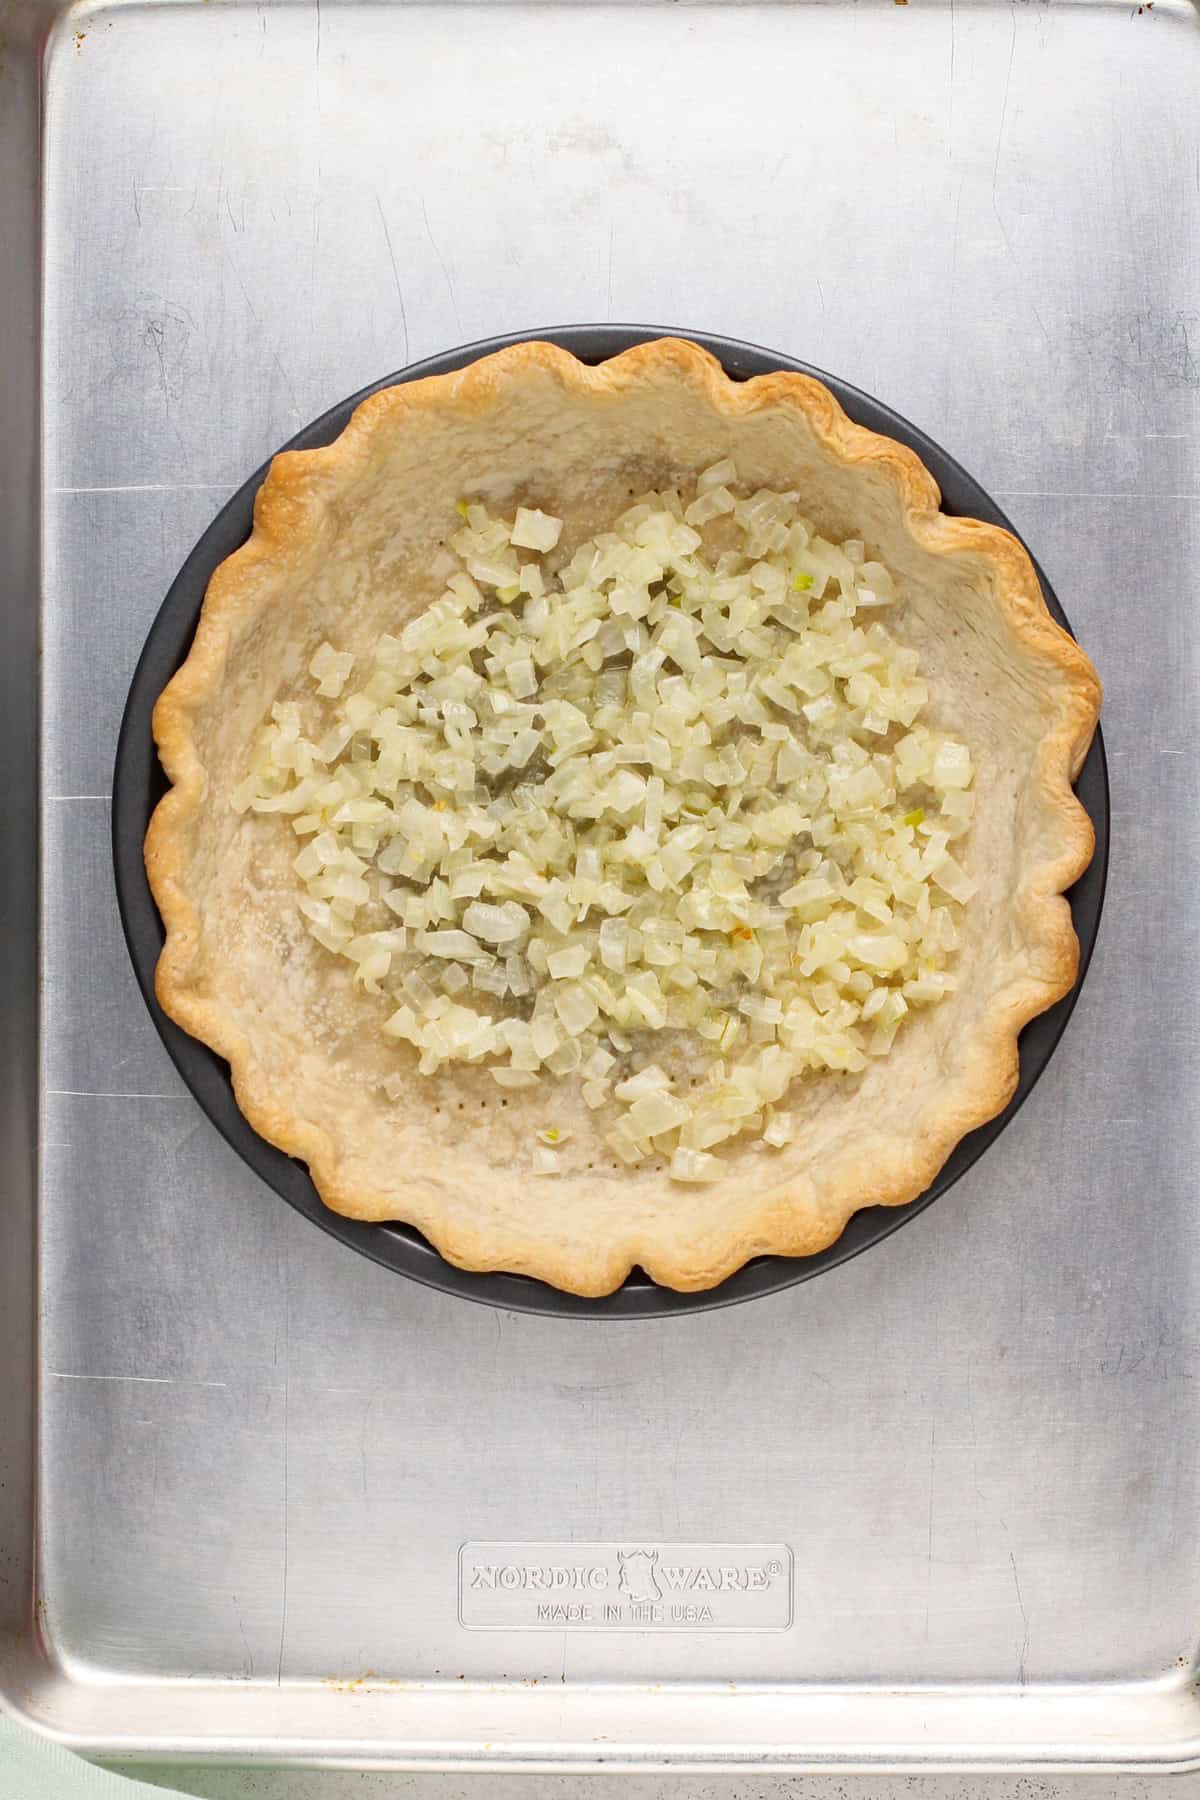 Sauted onions in a blind baked pie crust.